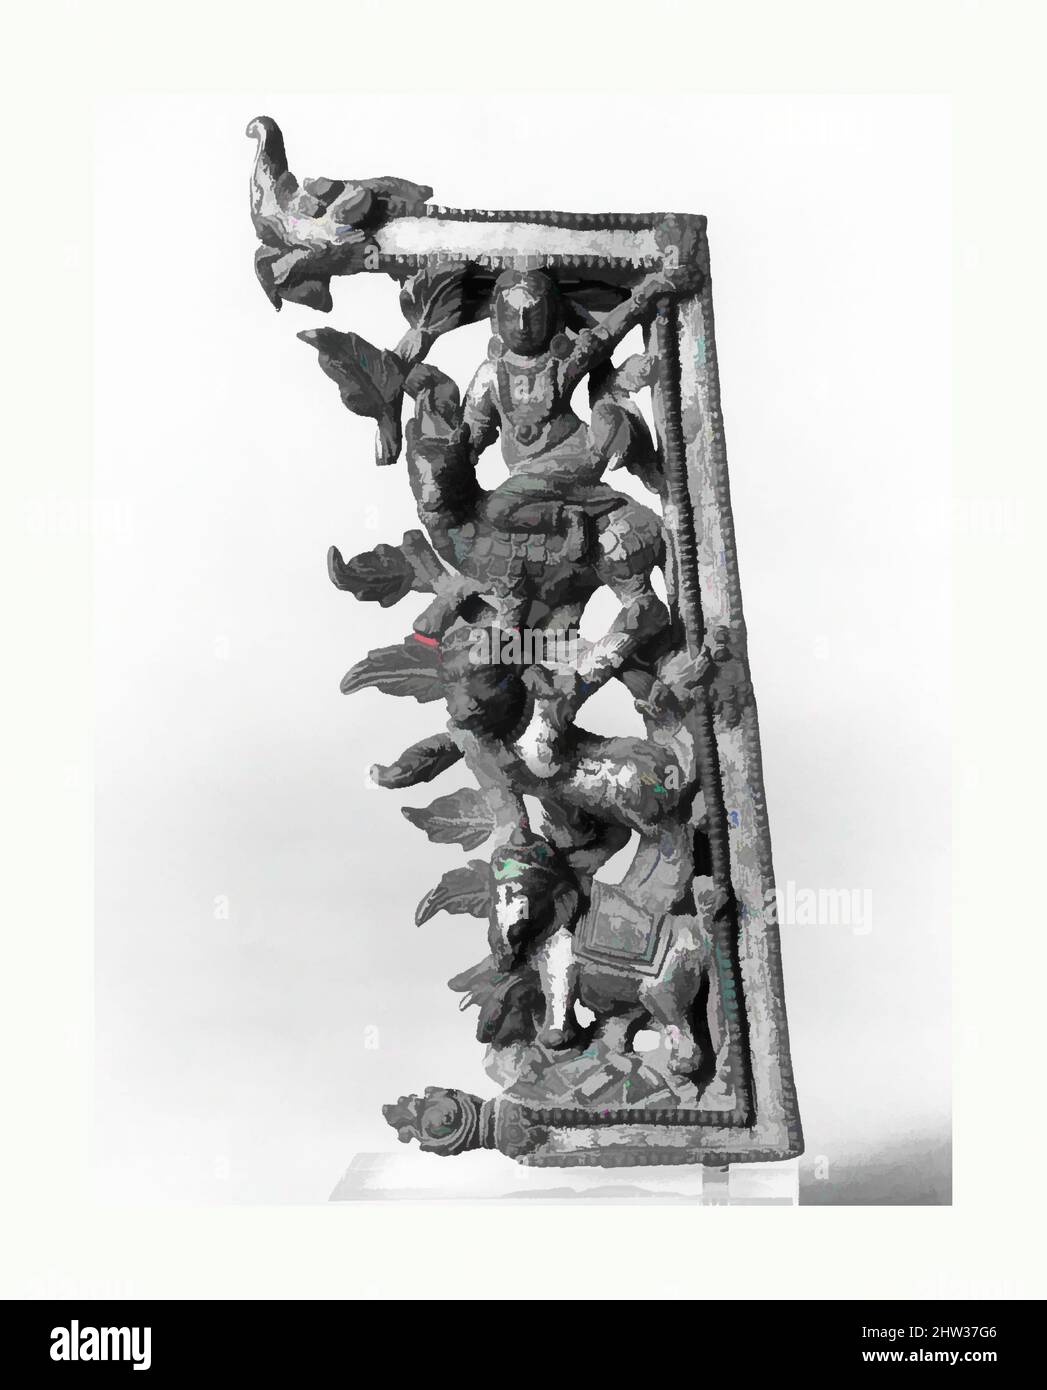 Art inspired by Fragment from the Backplate of an Icon, Malla period, 16th century, Nepal (Kathmandu Valley), Gilt copper alloy, 5 x 2 7/16 in. (12.7 x 6.2 cm), Sculpture, This openwork panel depicts a mélange of fantastic animals riotously placed in foliage, one upon the other: an, Classic works modernized by Artotop with a splash of modernity. Shapes, color and value, eye-catching visual impact on art. Emotions through freedom of artworks in a contemporary way. A timeless message pursuing a wildly creative new direction. Artists turning to the digital medium and creating the Artotop NFT Stock Photo